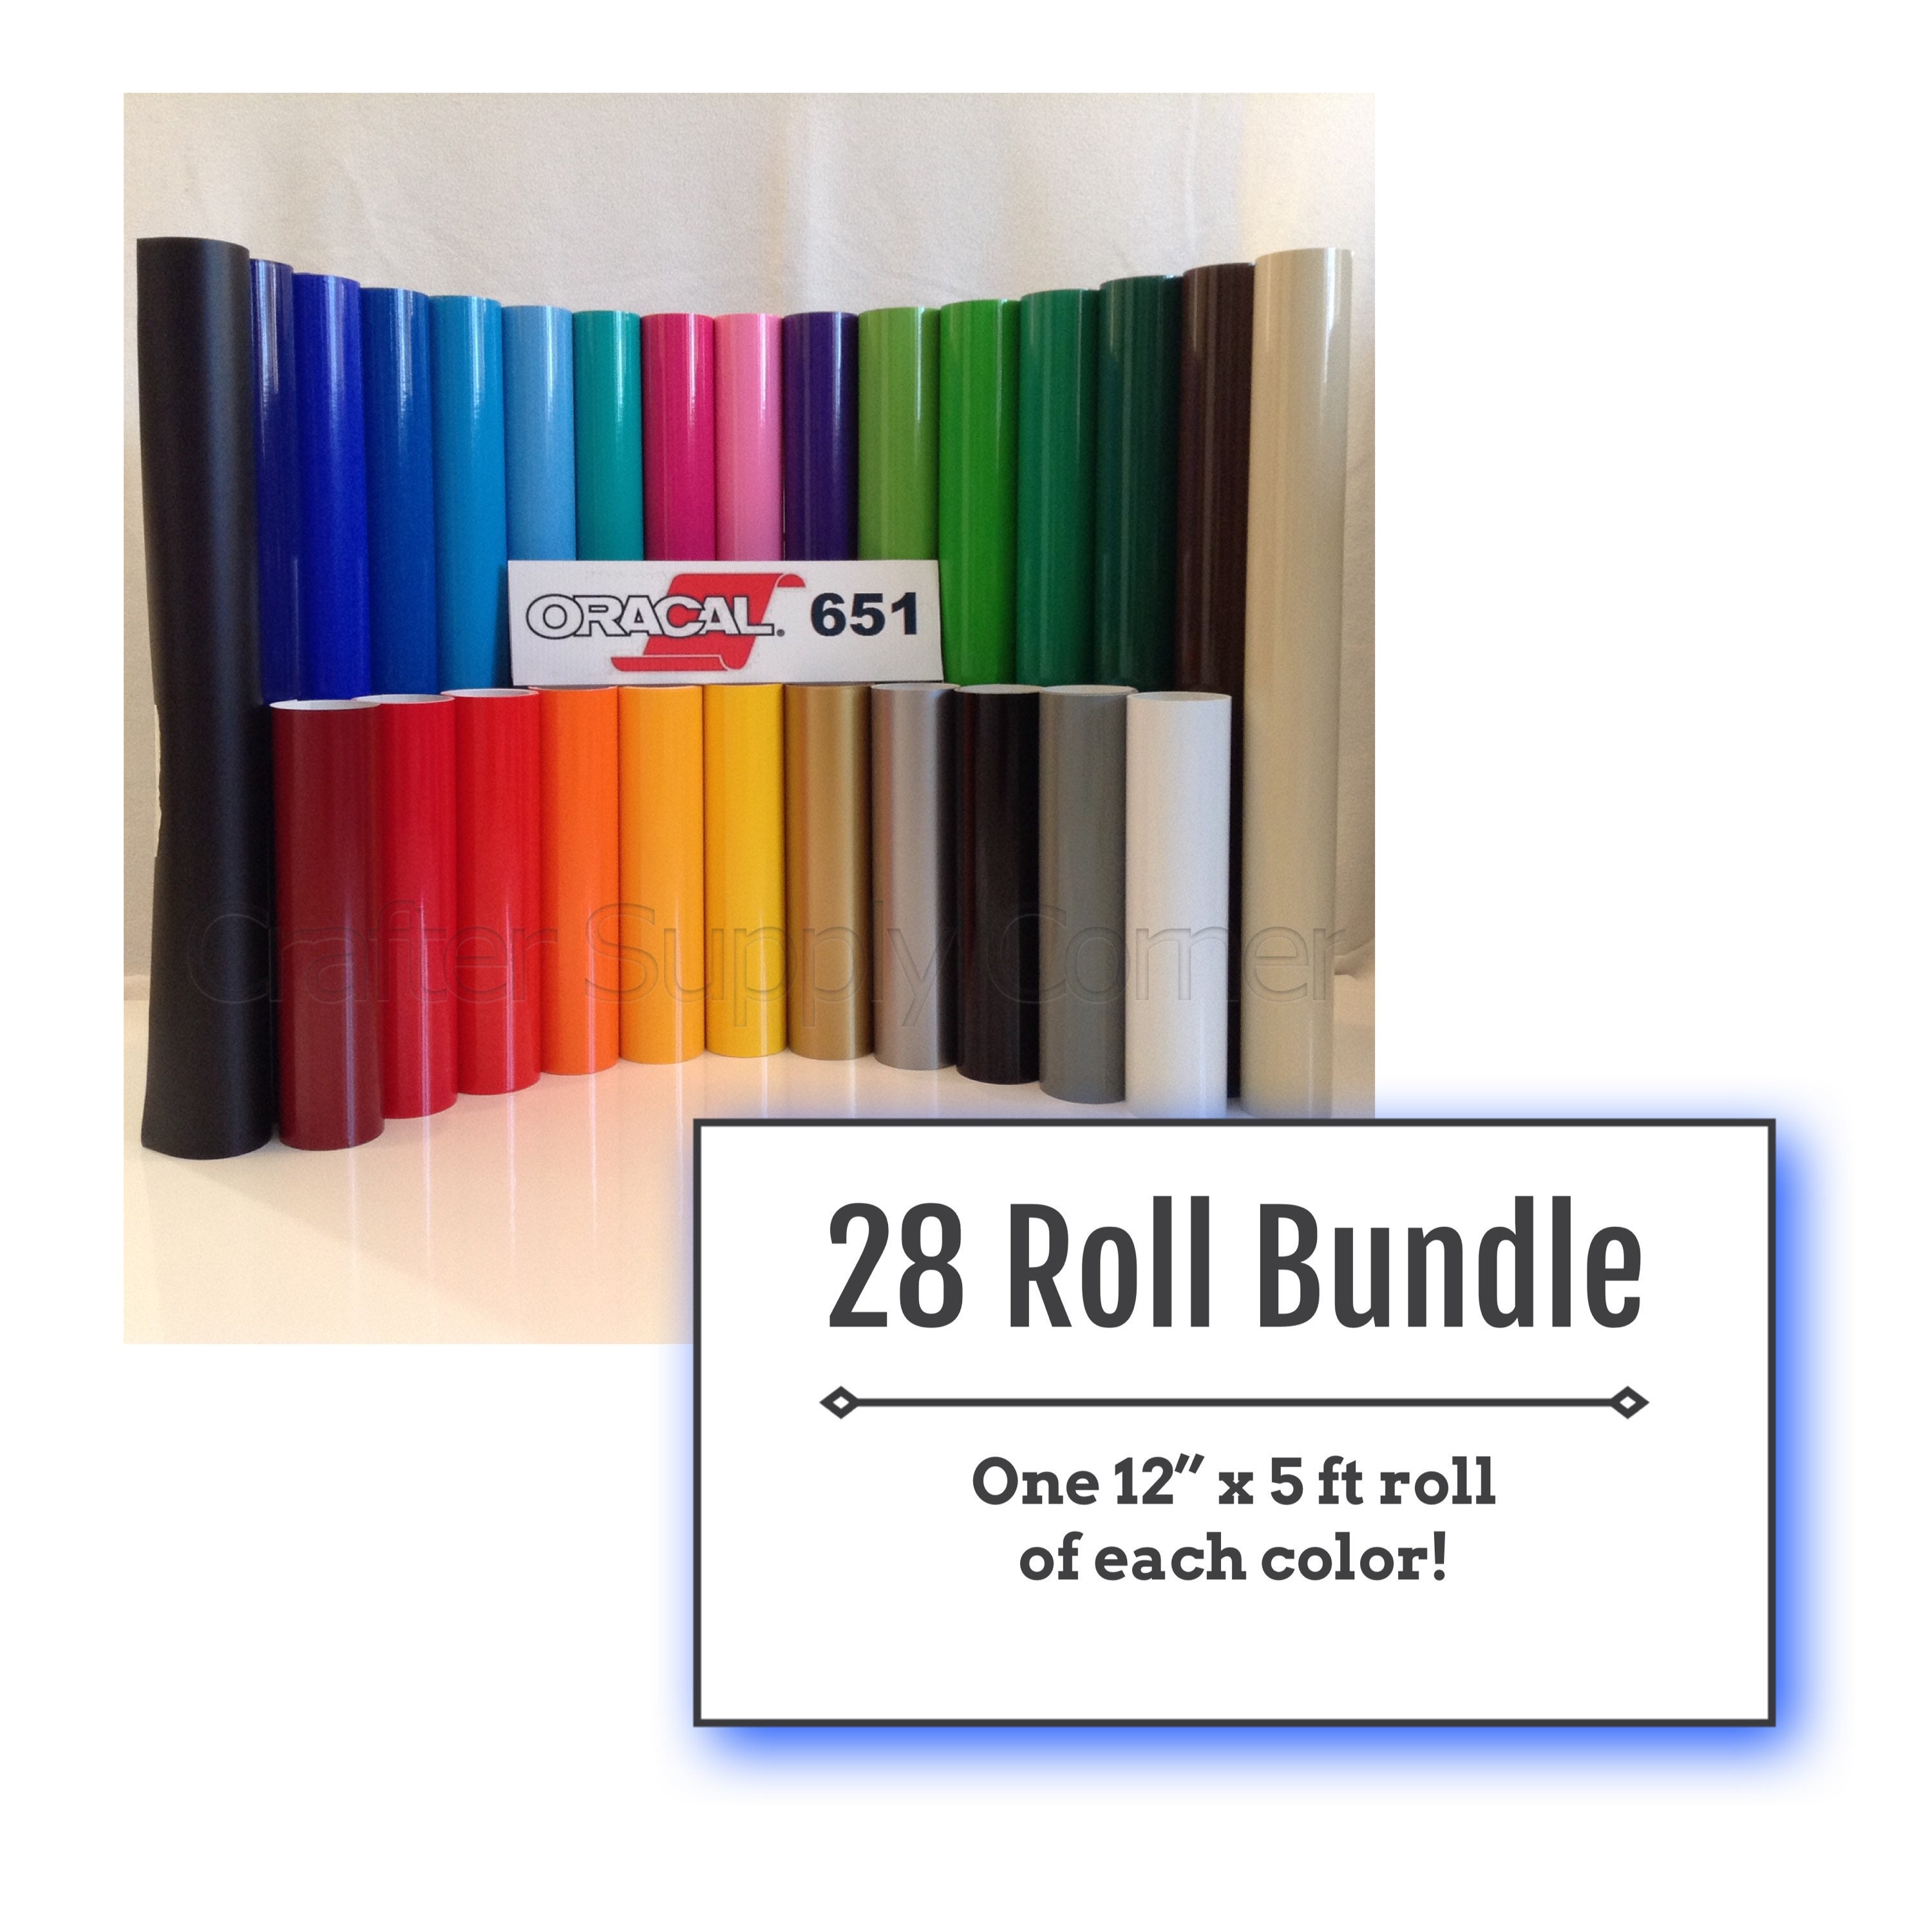 ORACAL 651 Gloss Craft Adhesive Vinyl 12 x 30 Multi-Color Roll Bundle for  Silhouette, Cricut & Die-Cutting Machines Including 12 x 30 Roll of